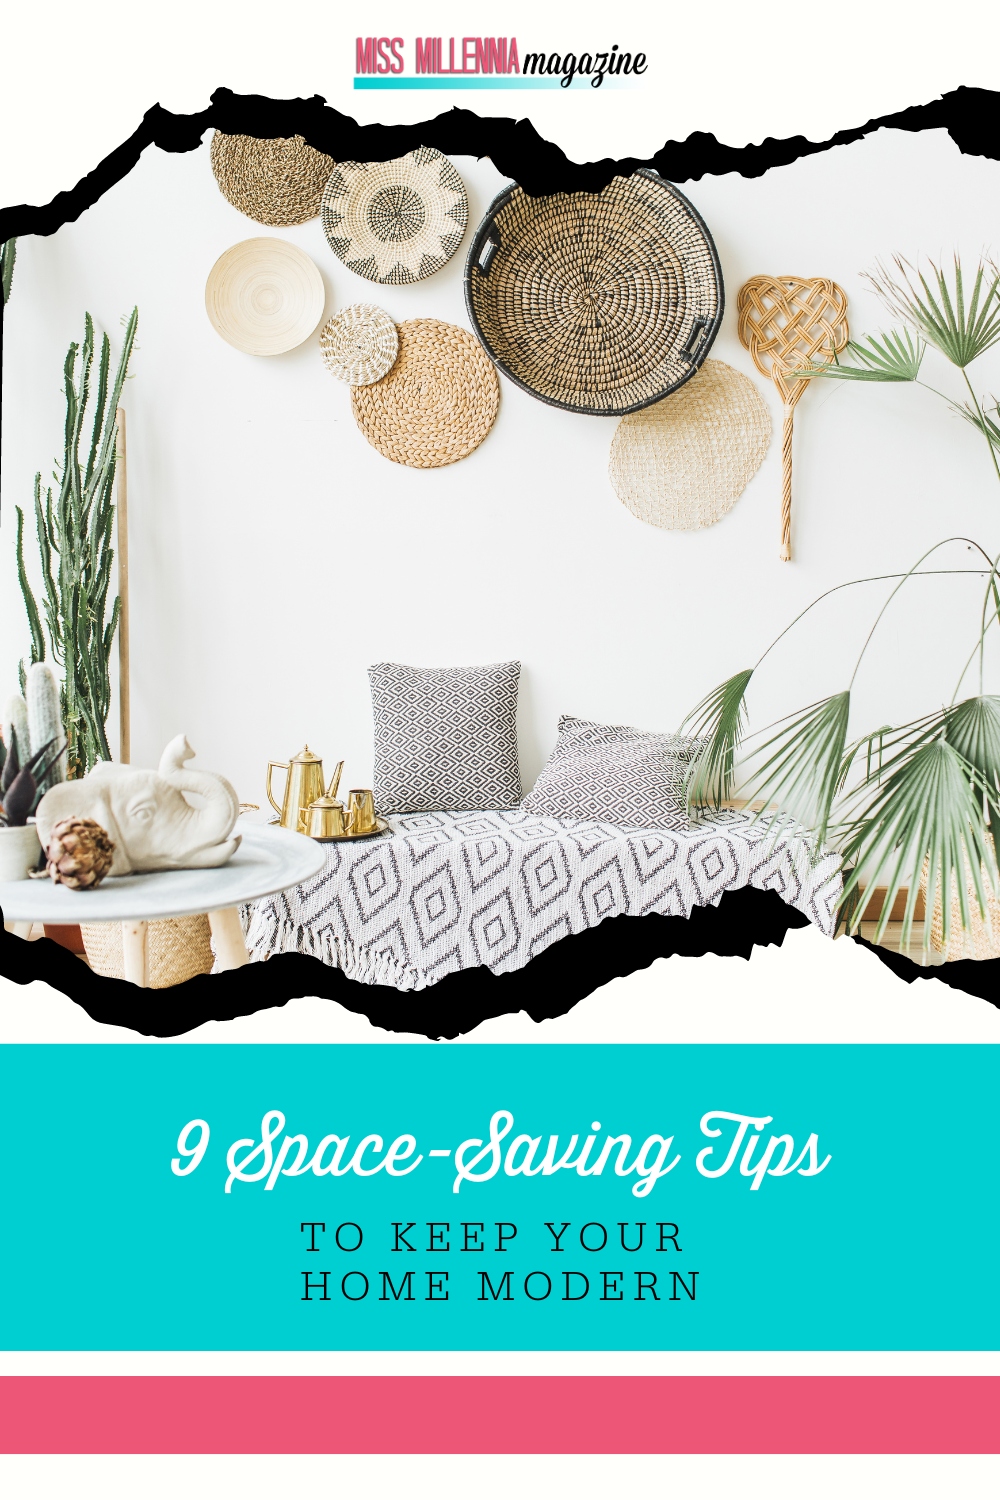 9 Space-Saving Tips to Keep Your Home Modern